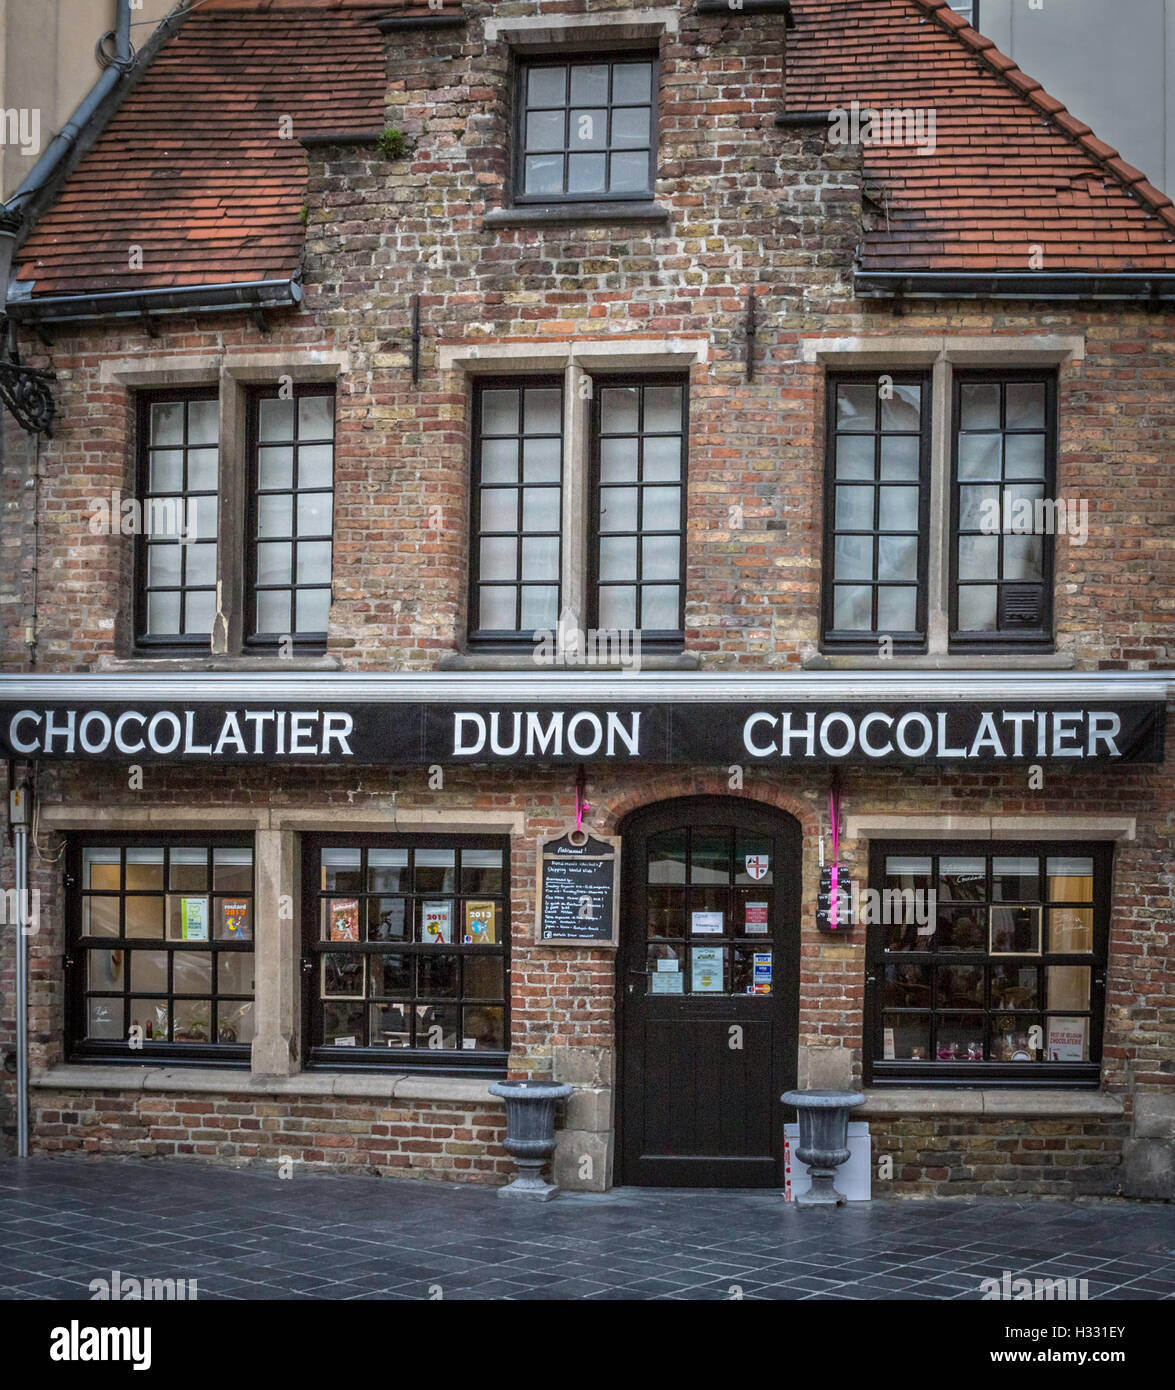 Dumon Chocolatier is a popular tourist attraction in Bruges, Belgium. It is famed for its delicious homemade chocolates. Stock Photo